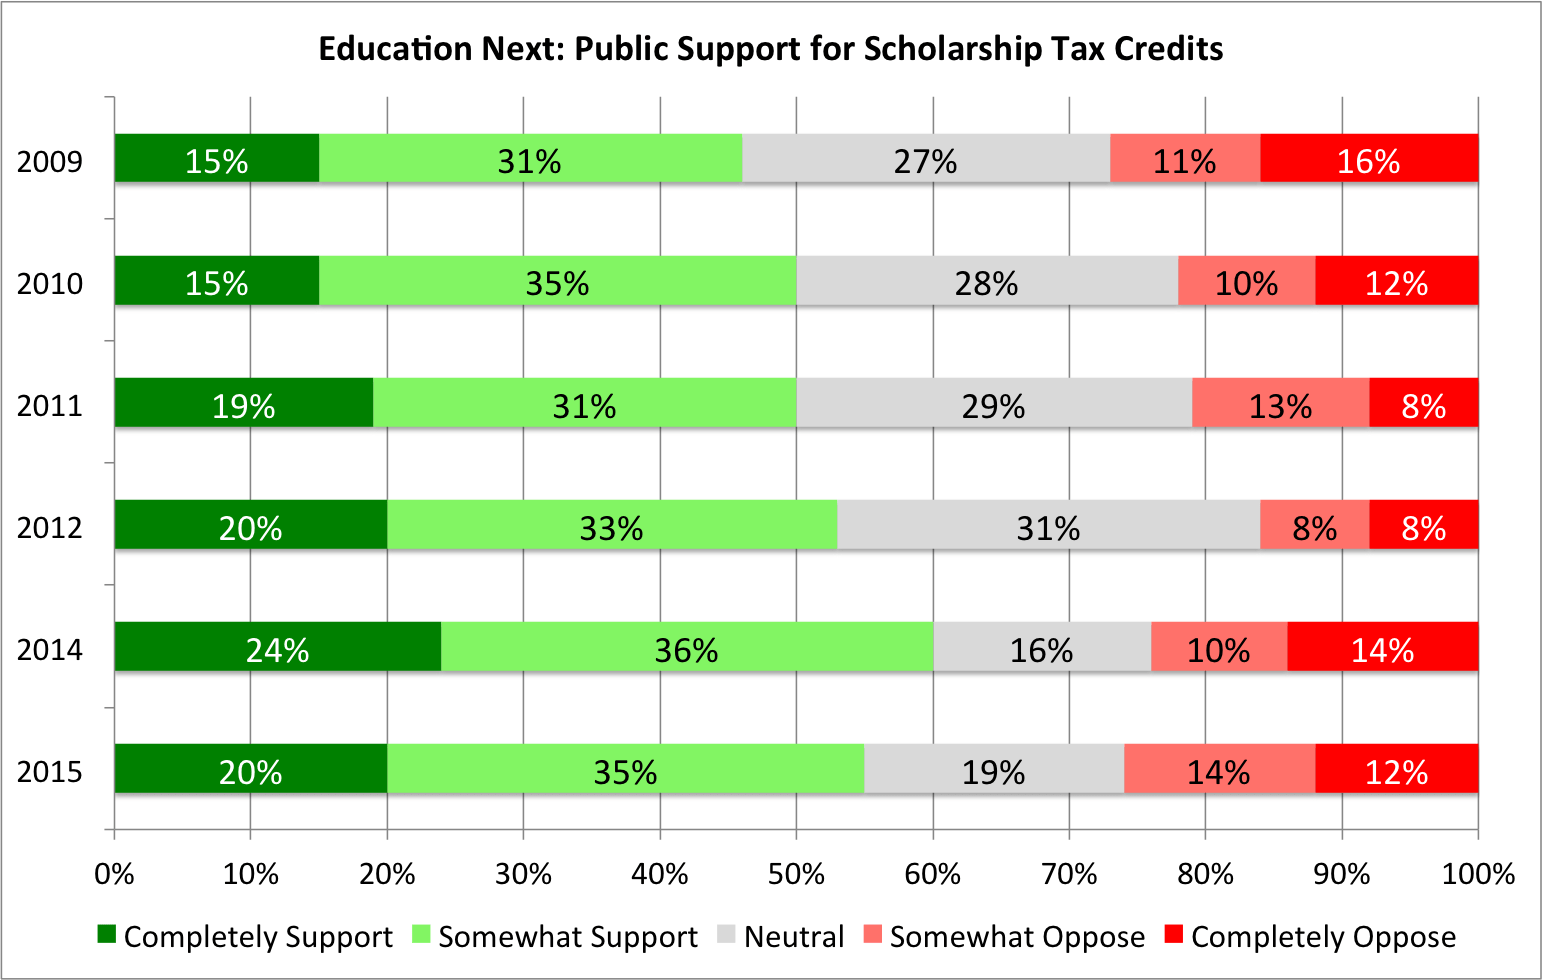 "A proposal has been made to offer a tax credit for individual and corporate donations that pay for scholarships to help low-income parents send their children to private schools. Would you favor or oppose such a proposal?"